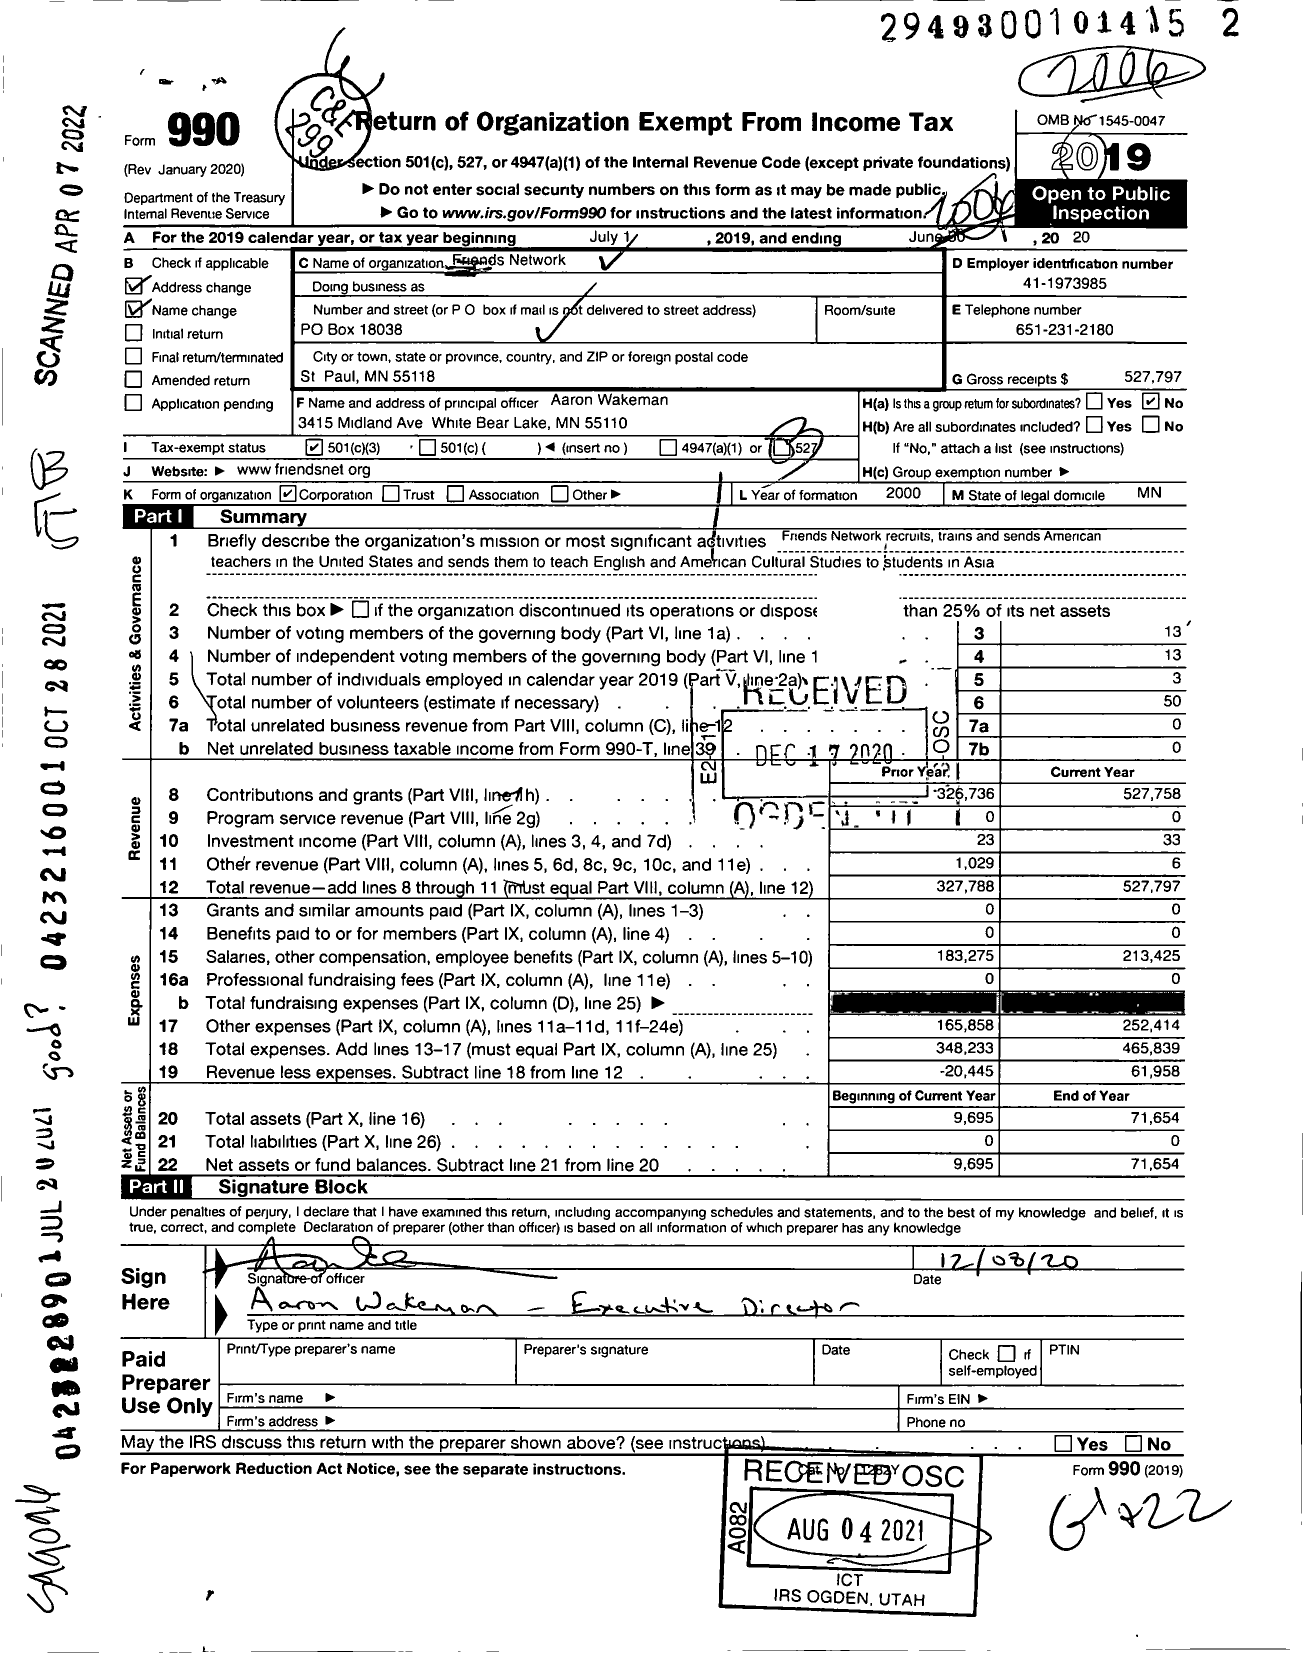 Image of first page of 2019 Form 990 for Friends Network